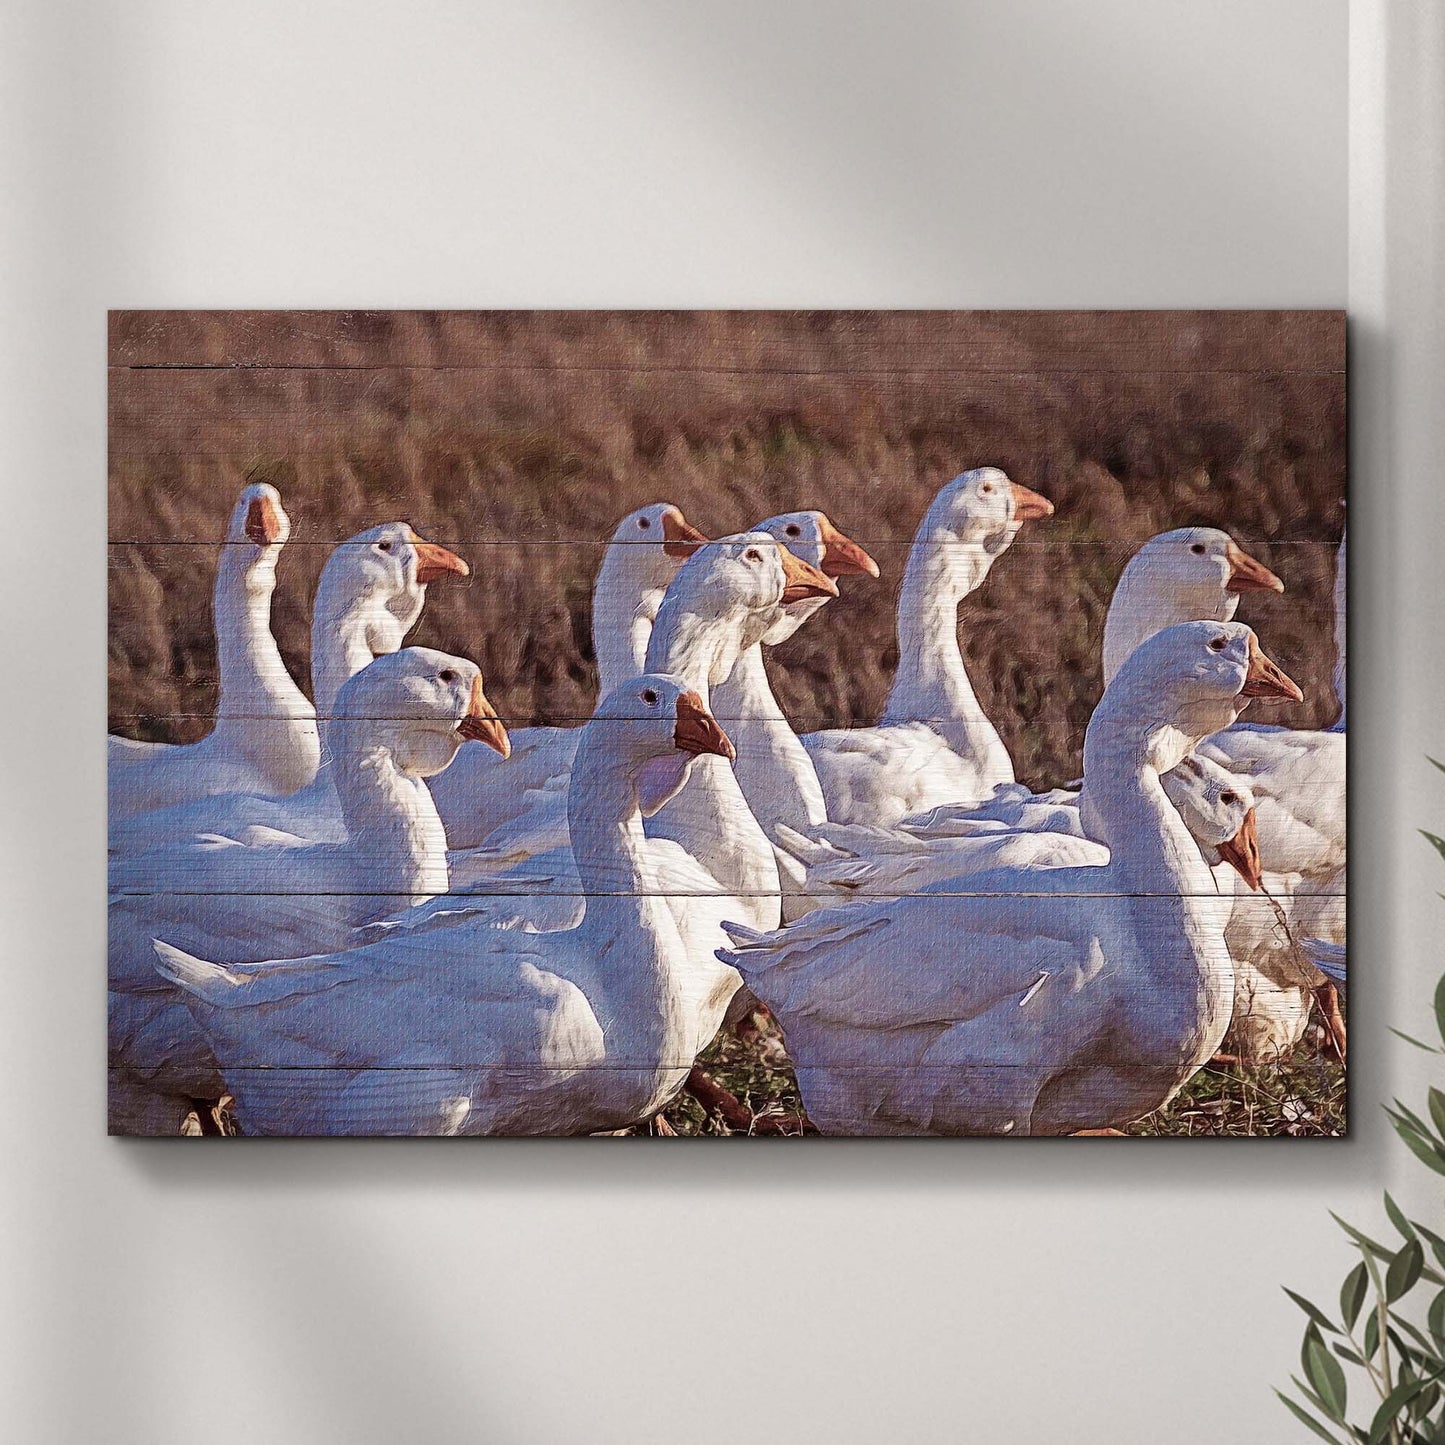 Marching Geese Canvas Wall Art - Image by Tailored Canvases